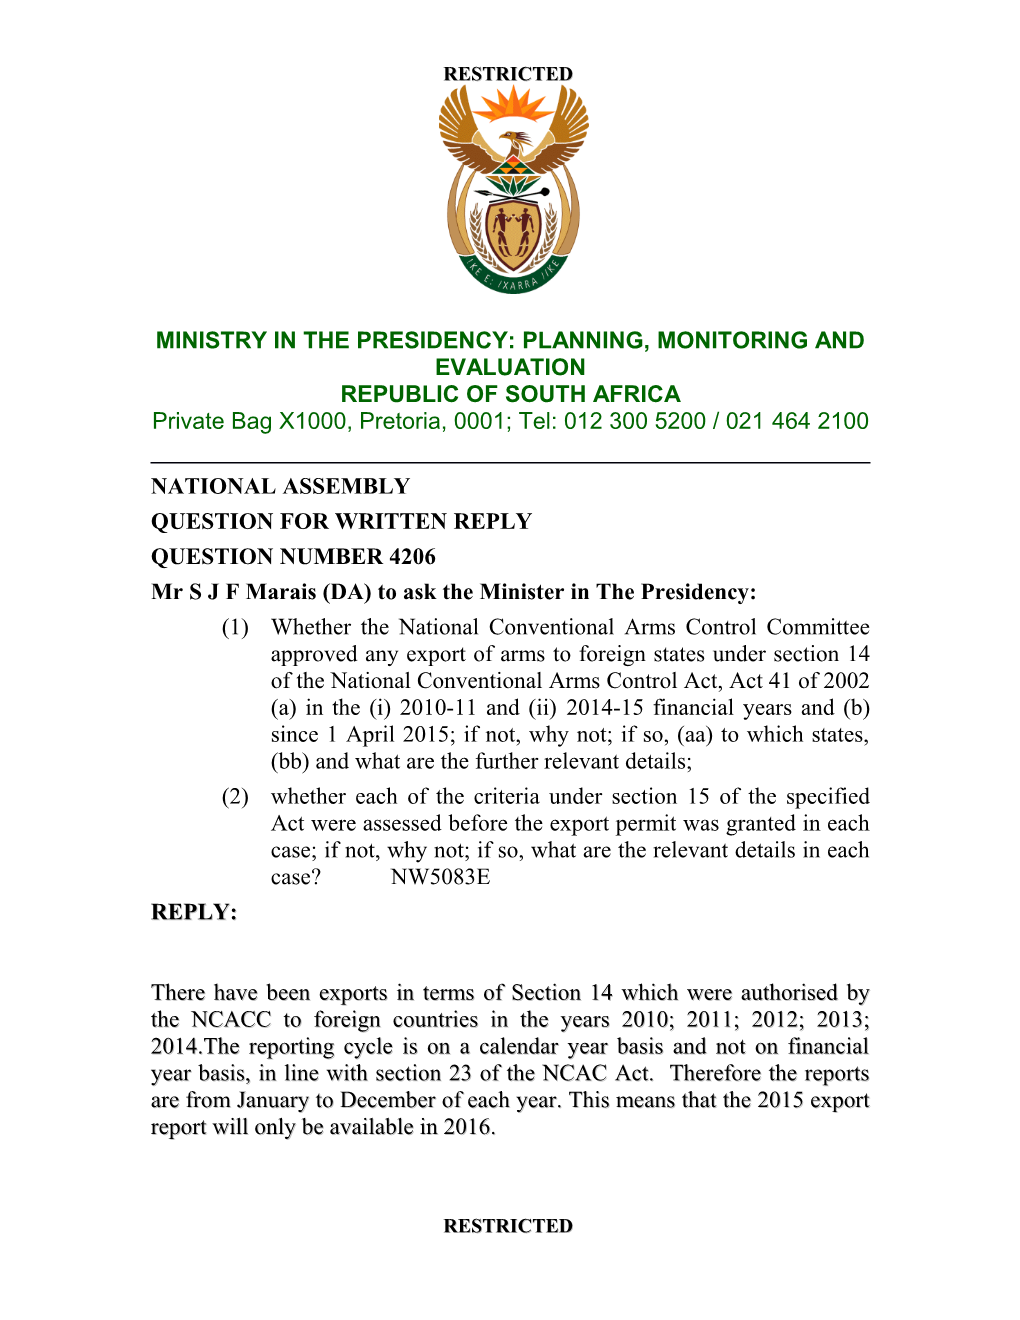 Ministry in the Presidency: Planning, Monitoring and Evaluation